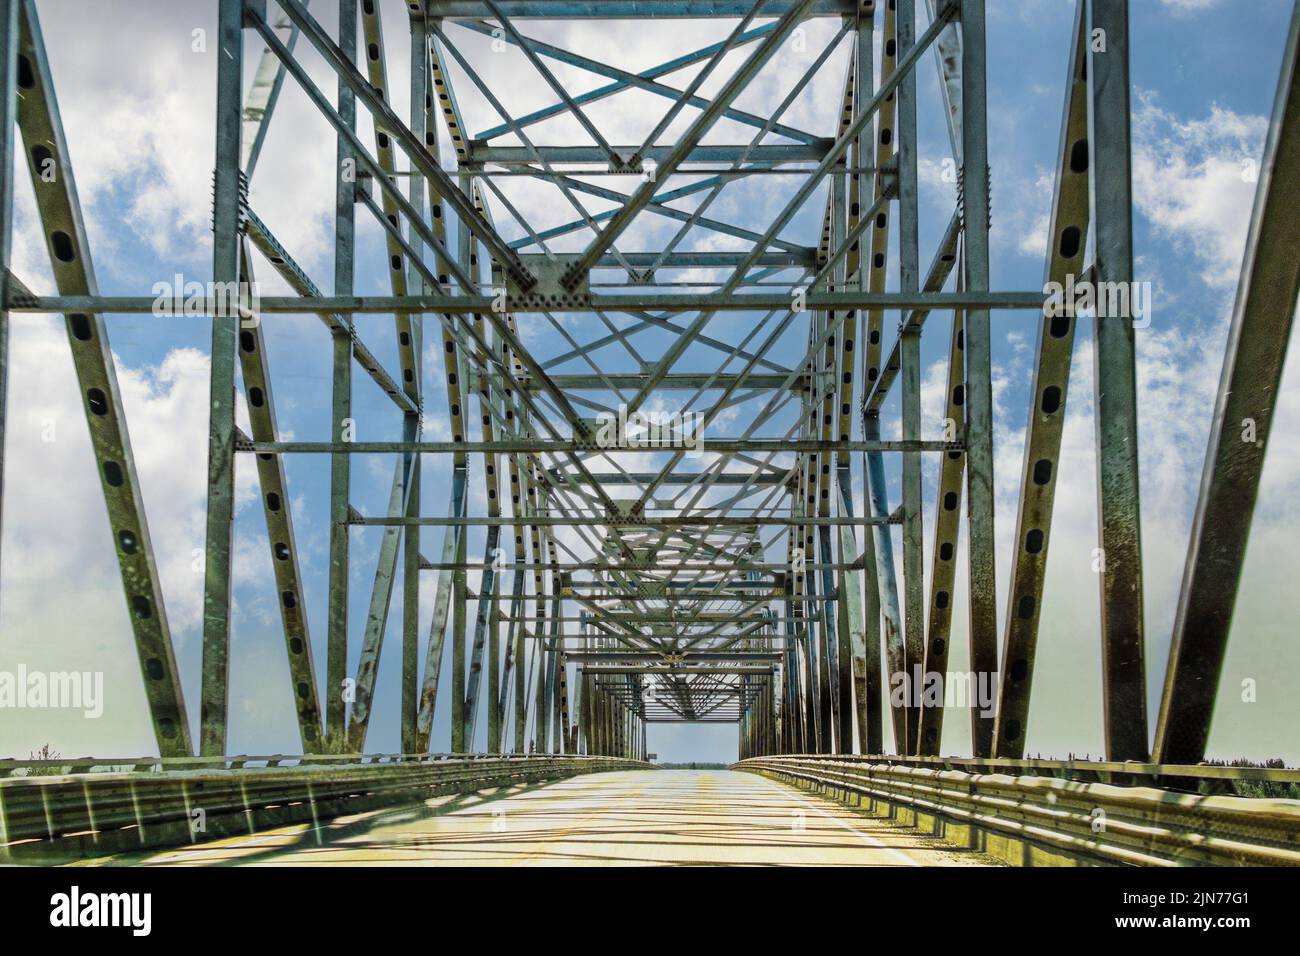 Crossing a multi-span highway truss bridge over river with cloudy blue sky Stock Photo